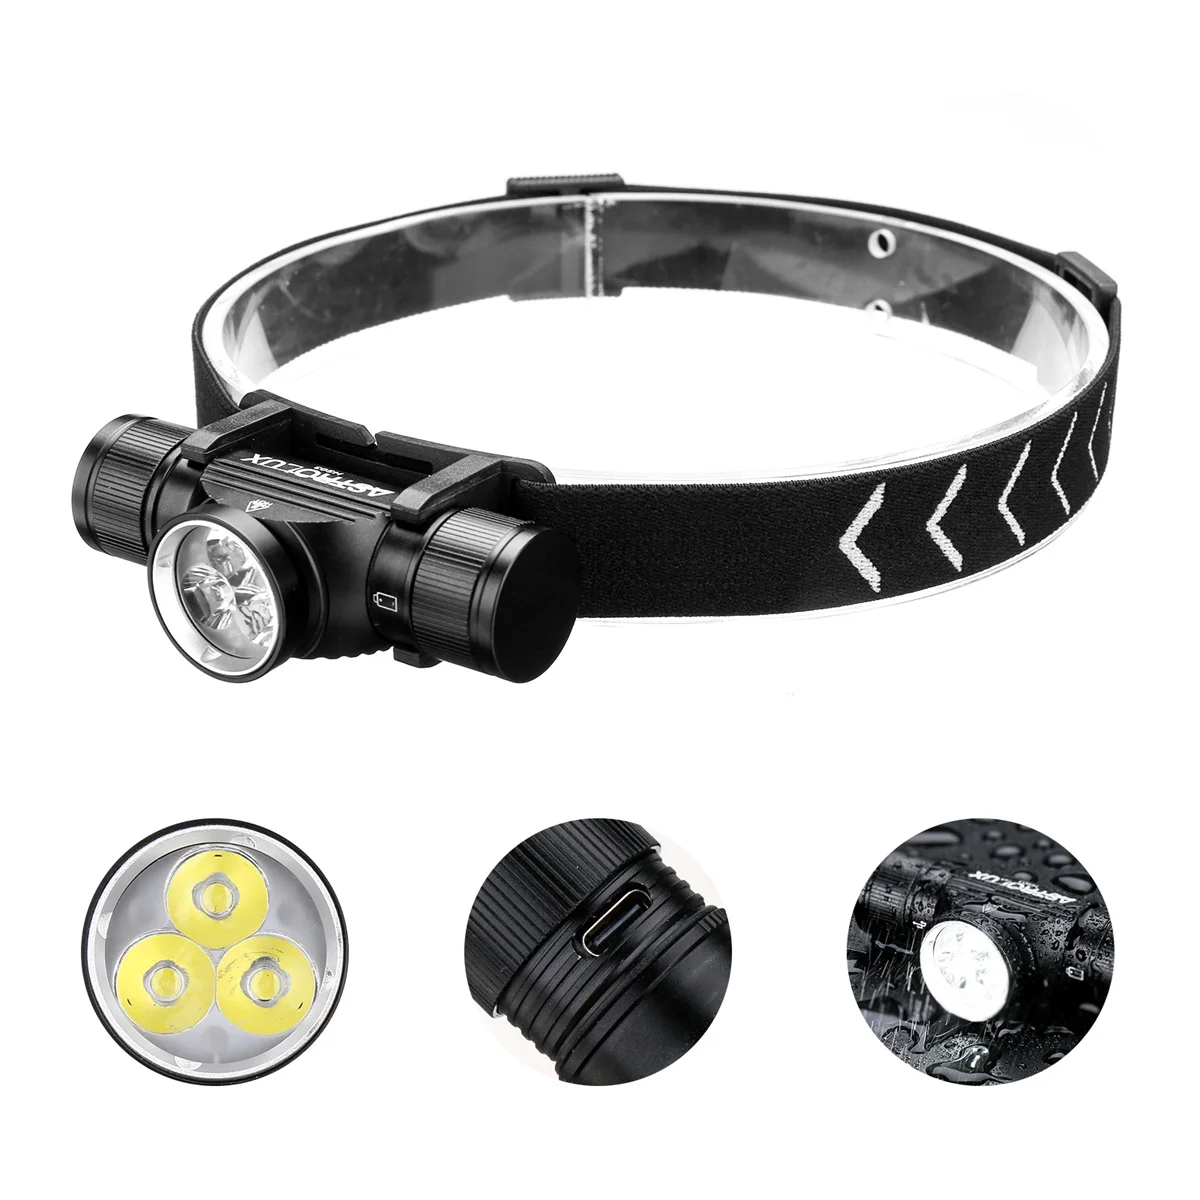 Astrolux HS03 3*LH351B LED 1080LM Headlamp USB-C Rechargesble 18650 Battery IP66 Waterproof 180° Rotation Headlight For Outdoor